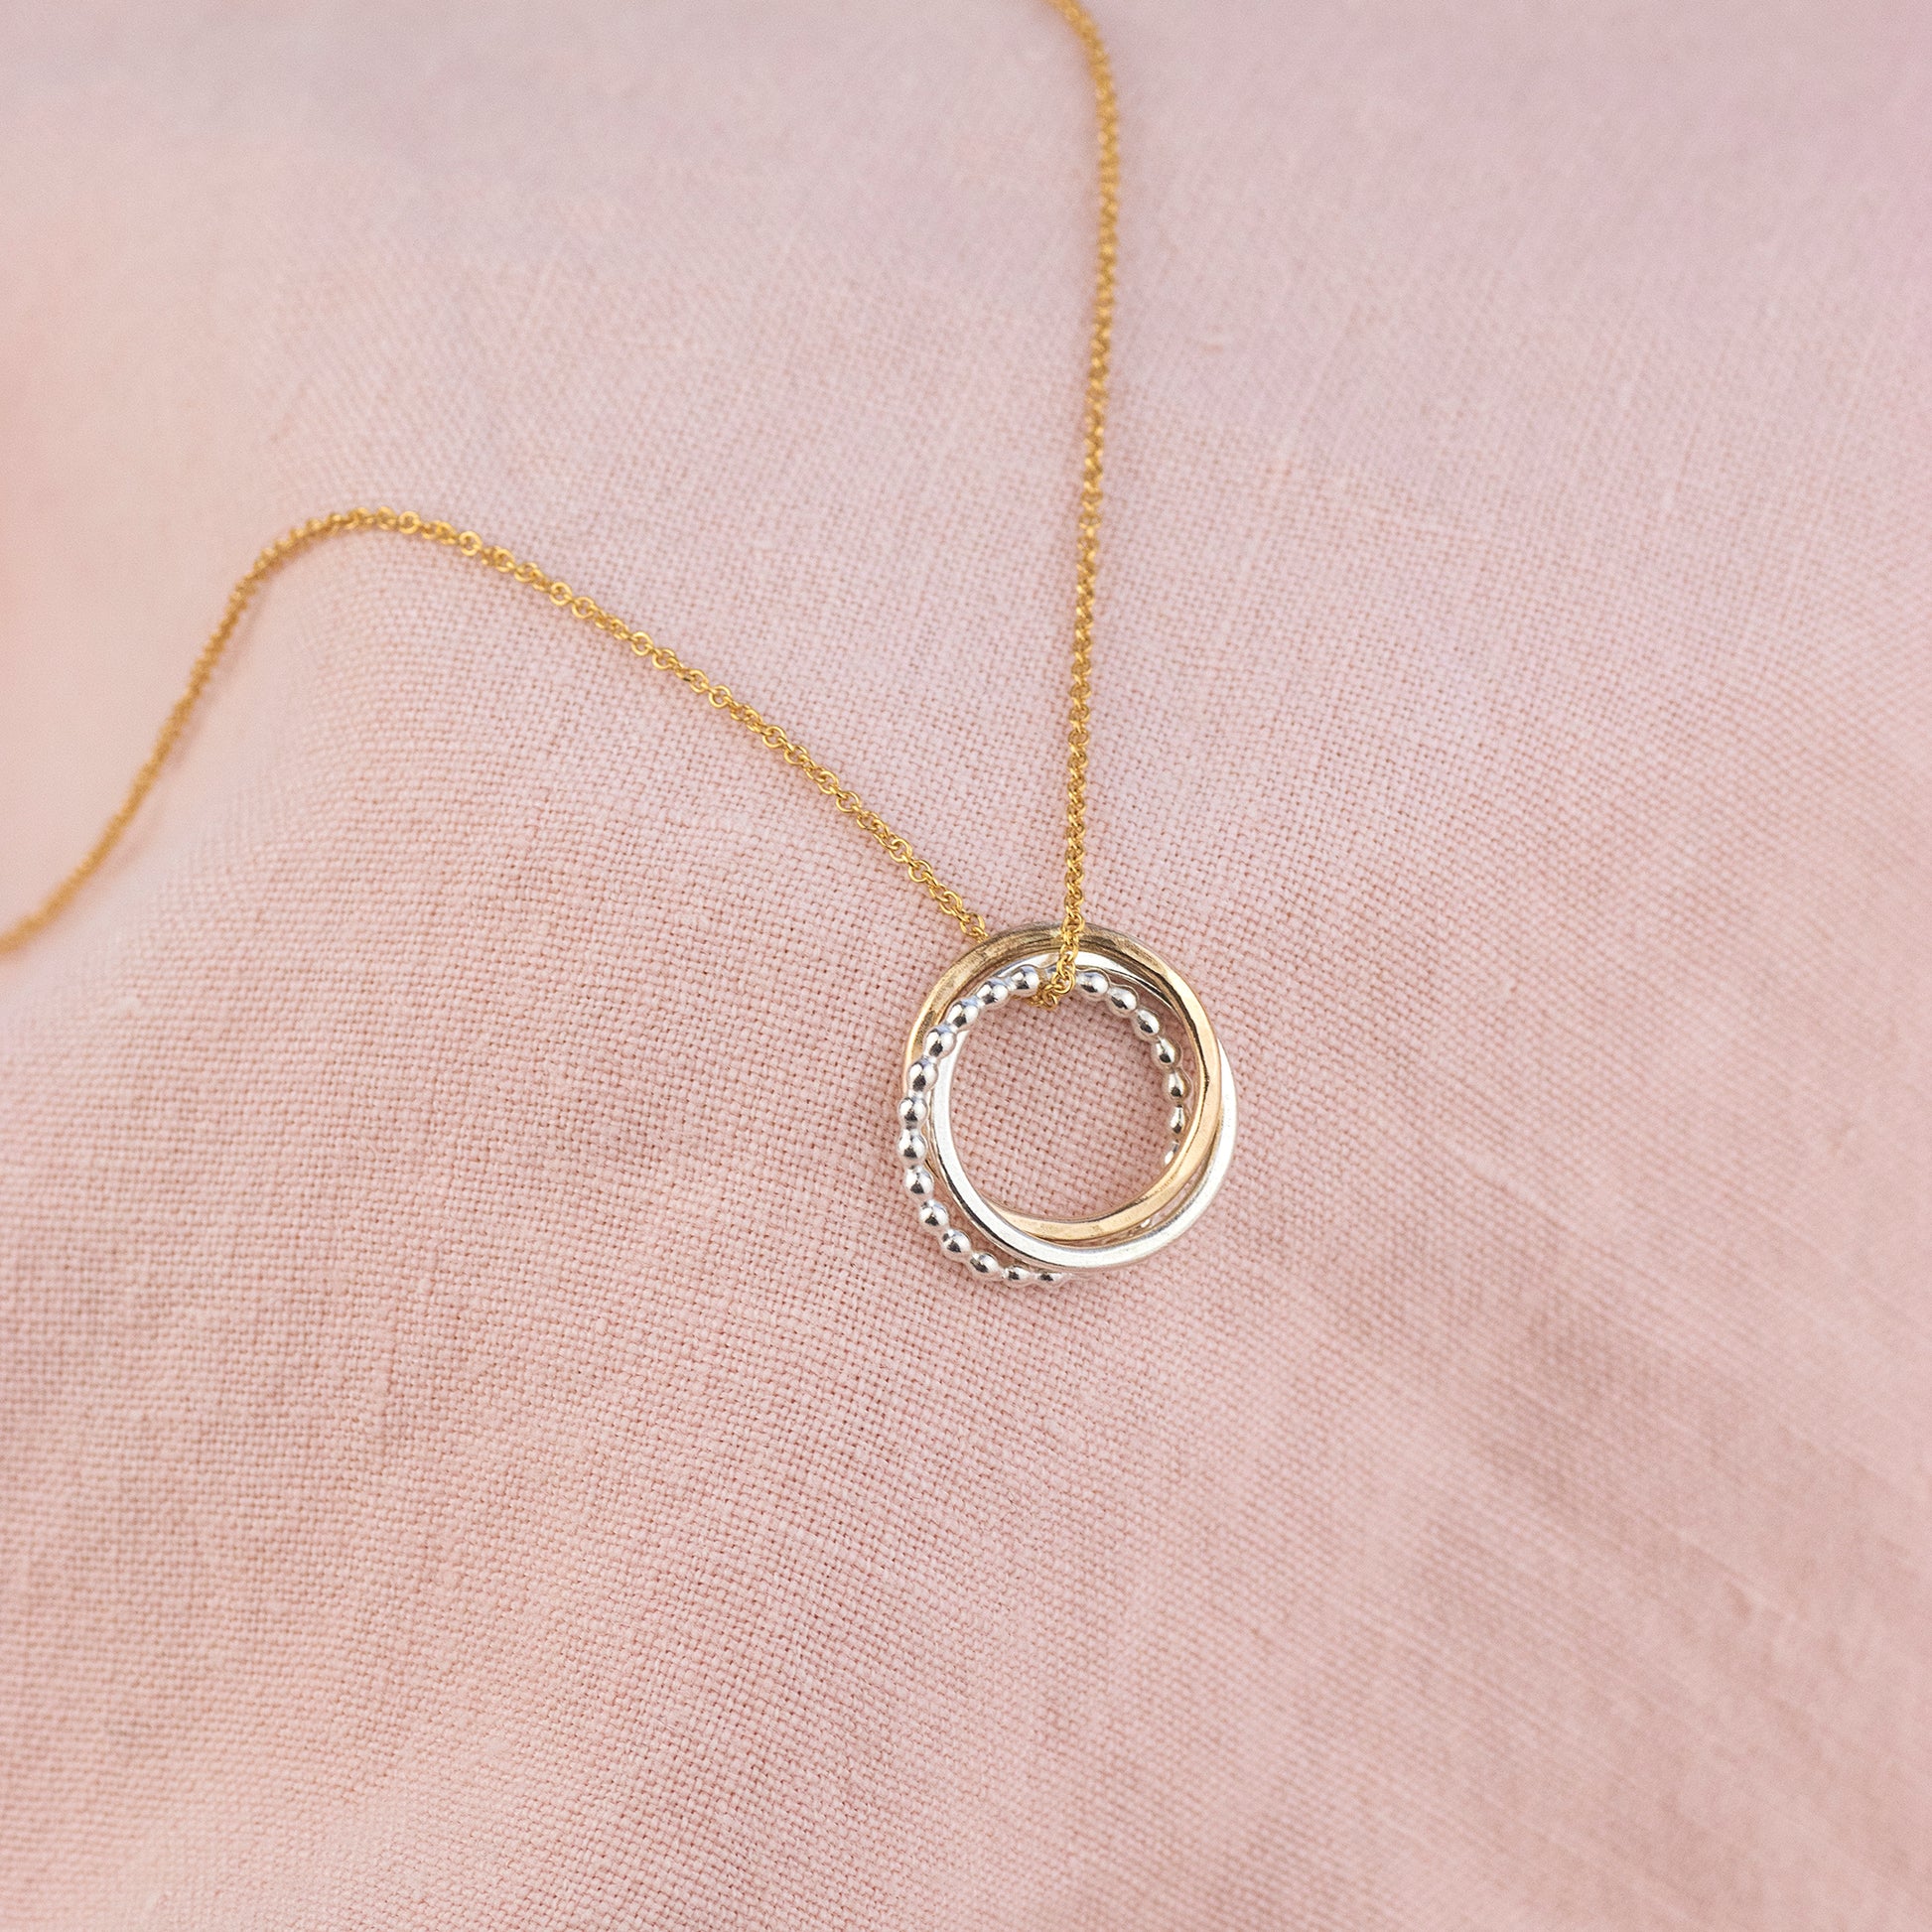 30th Birthday Necklace - The Original 3 Links for 3 Decades Necklace - Petite Silver & Gold